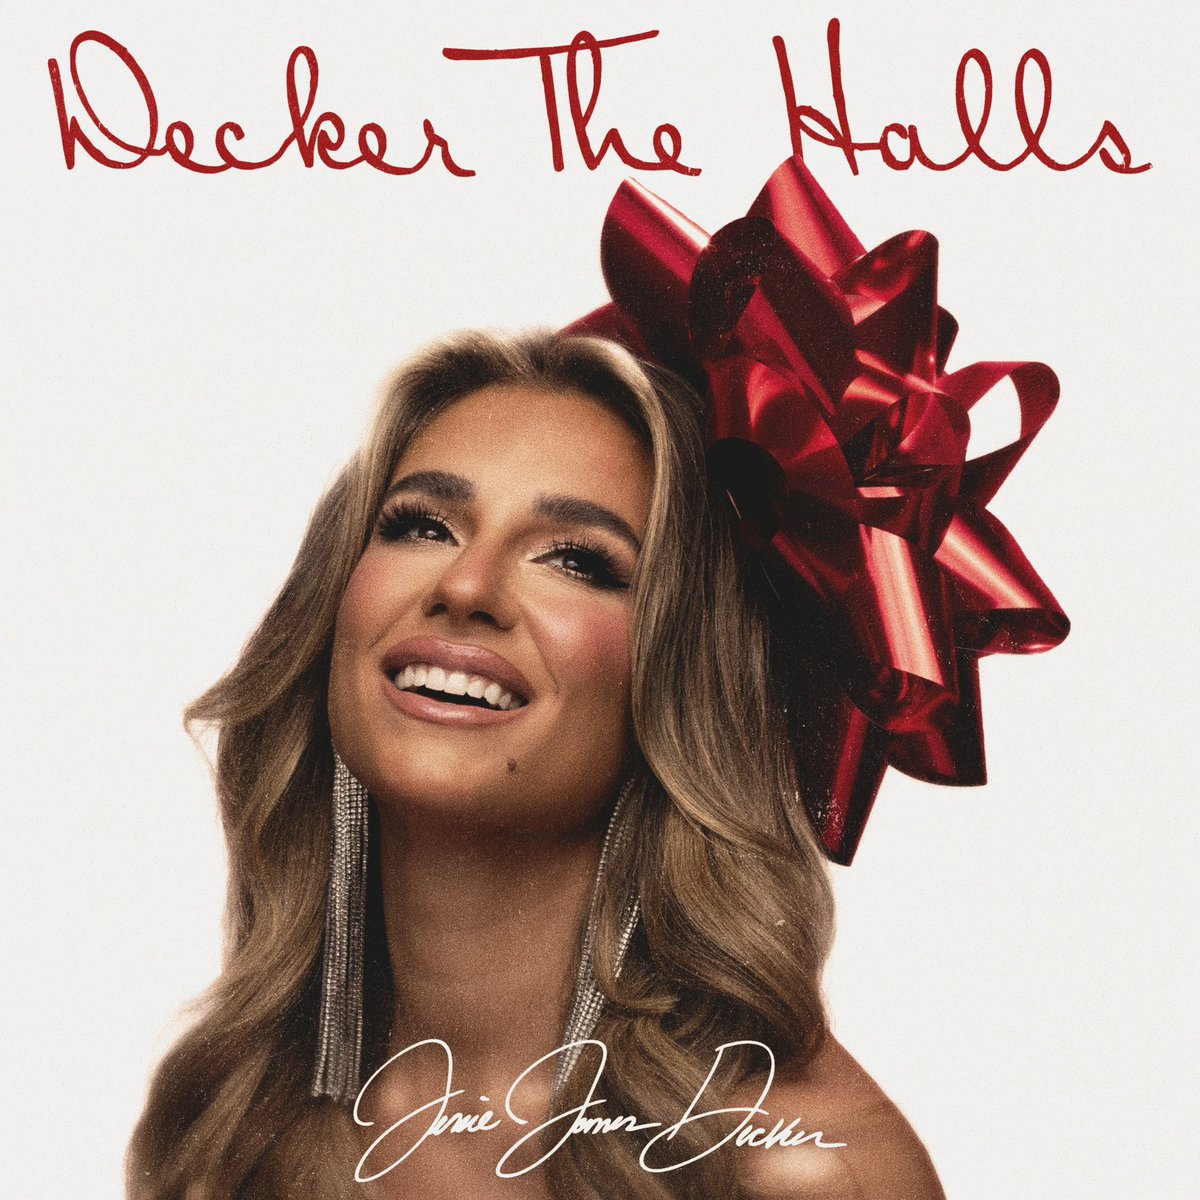 My new Christmas record “Decker The Halls” is out everywhere now!! 🫶🏼🫶🏼🥰🥰🥰🎉🎉🎉🎉 It was so important for me to capture that classic holiday sound I grew up with. Listen now ❤️❤️❤️ jessiejamesdecker.lnk.to/deckerthehalls